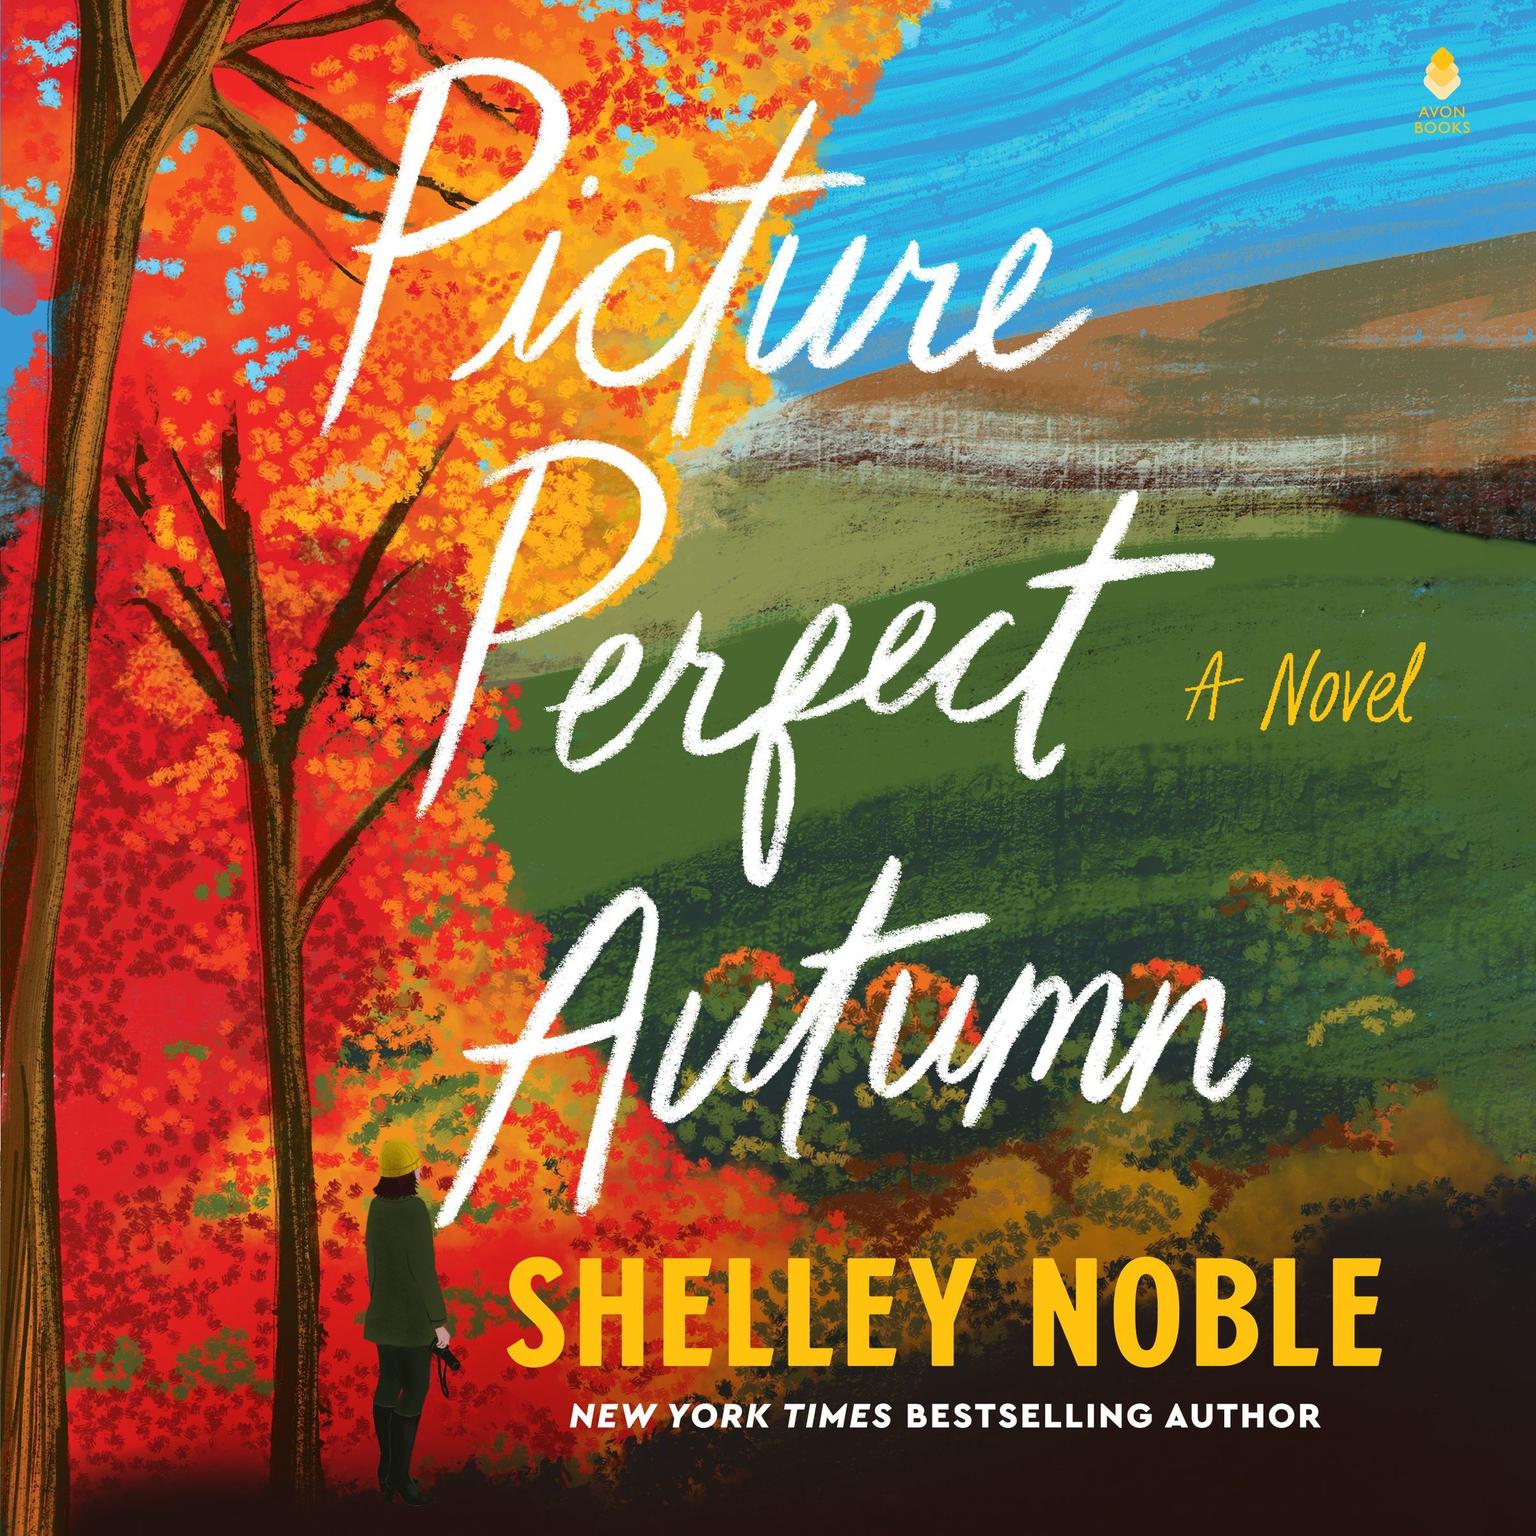 Picture Perfect Autumn: A Novel Audiobook, by Shelley Noble